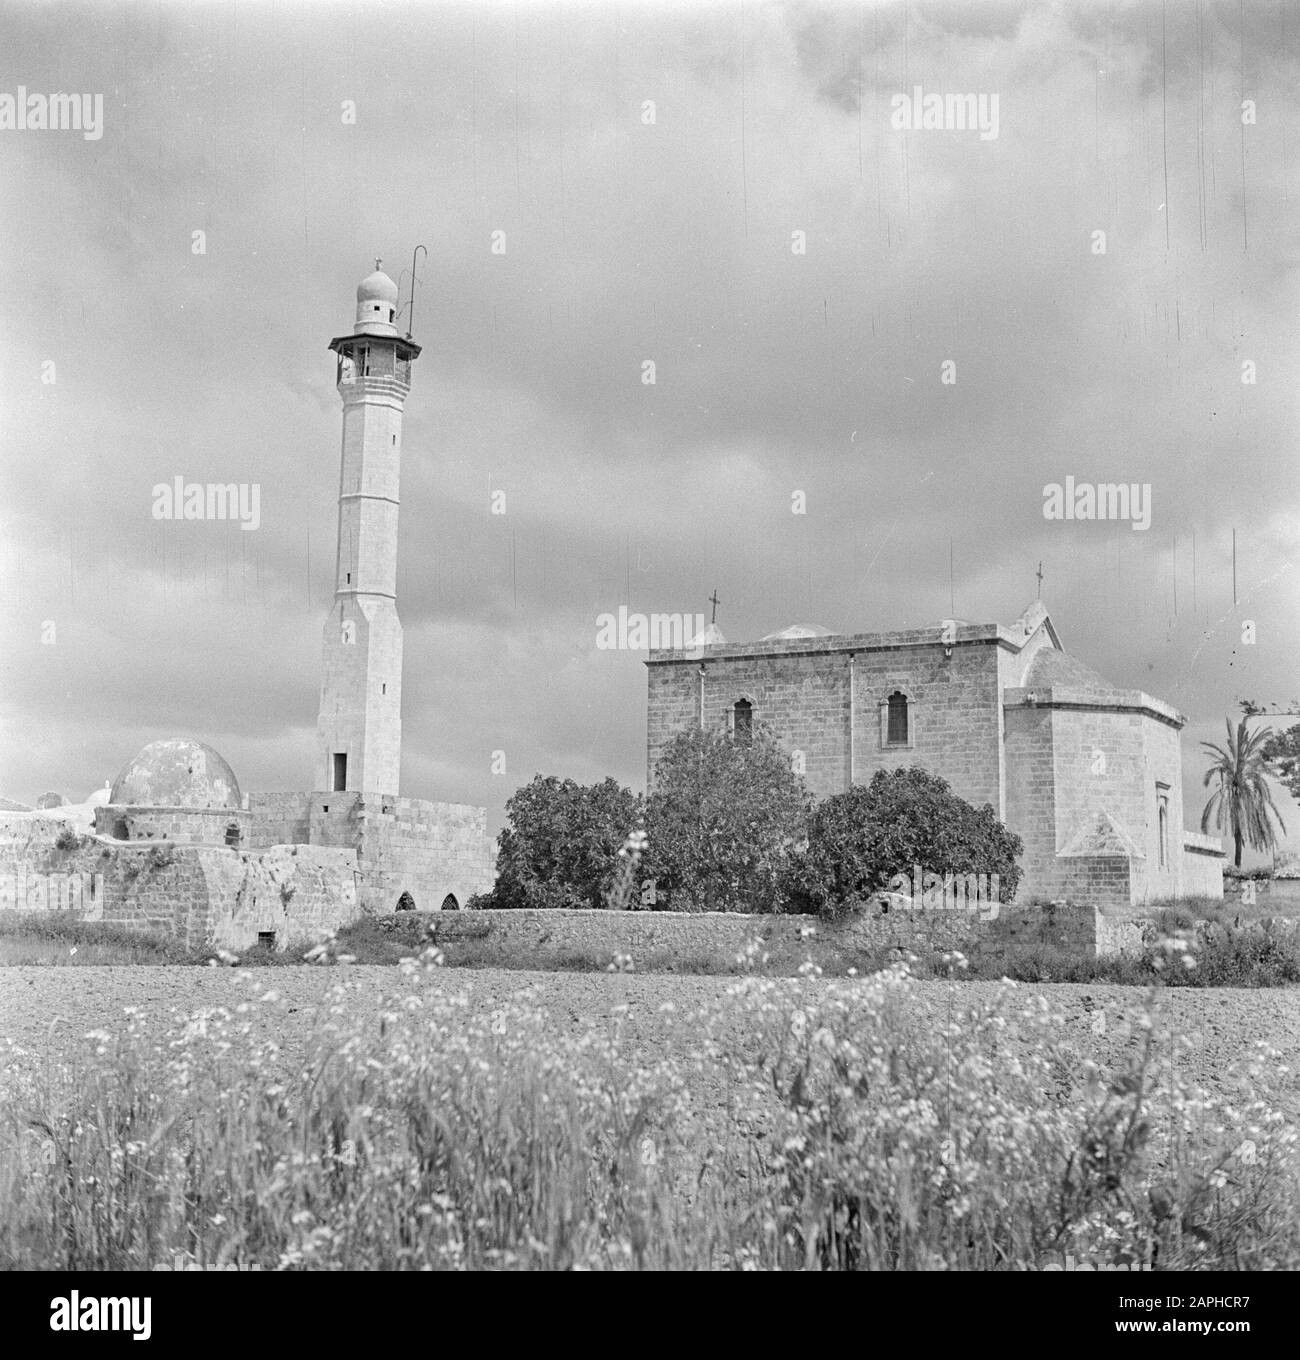 Israel 1948-1949: Lydda (Lod) Description: The Greek Orthodox St. Joris church (right) and the El Chodr mosque (left) Annotation: The houses of worship are part of the same building complex and share a common wall Date: 1948 Location: Israel, Lydda Keywords: churches, mosques, towers Stock Photo